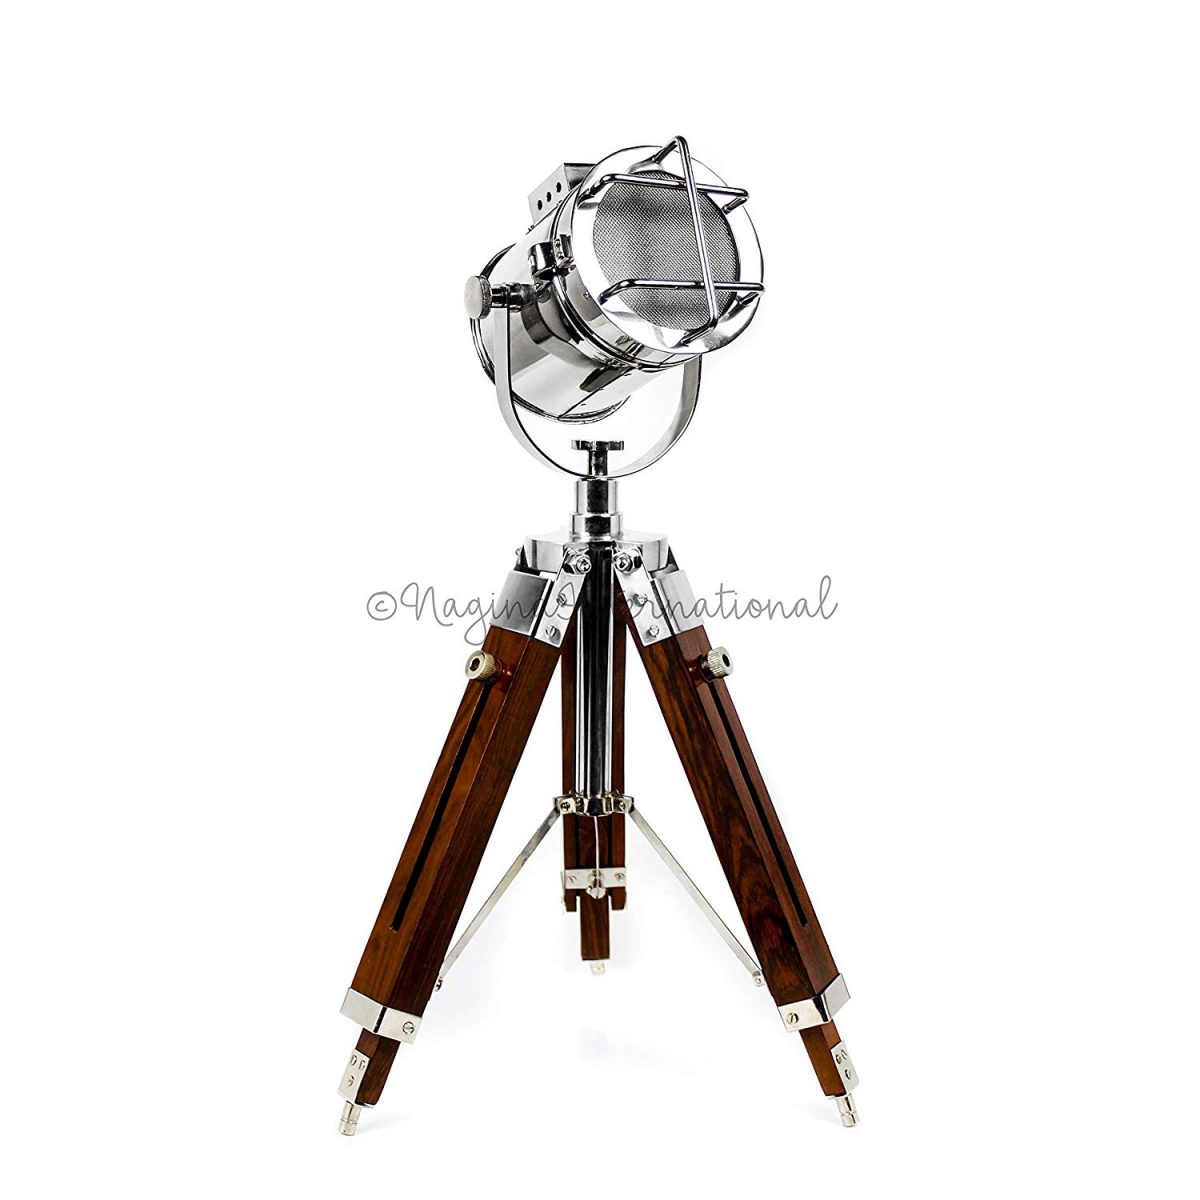 Nagina International Authentic Nickel Plated Classic Stage Functional Spotlight | Unique Antique Metal Gifts